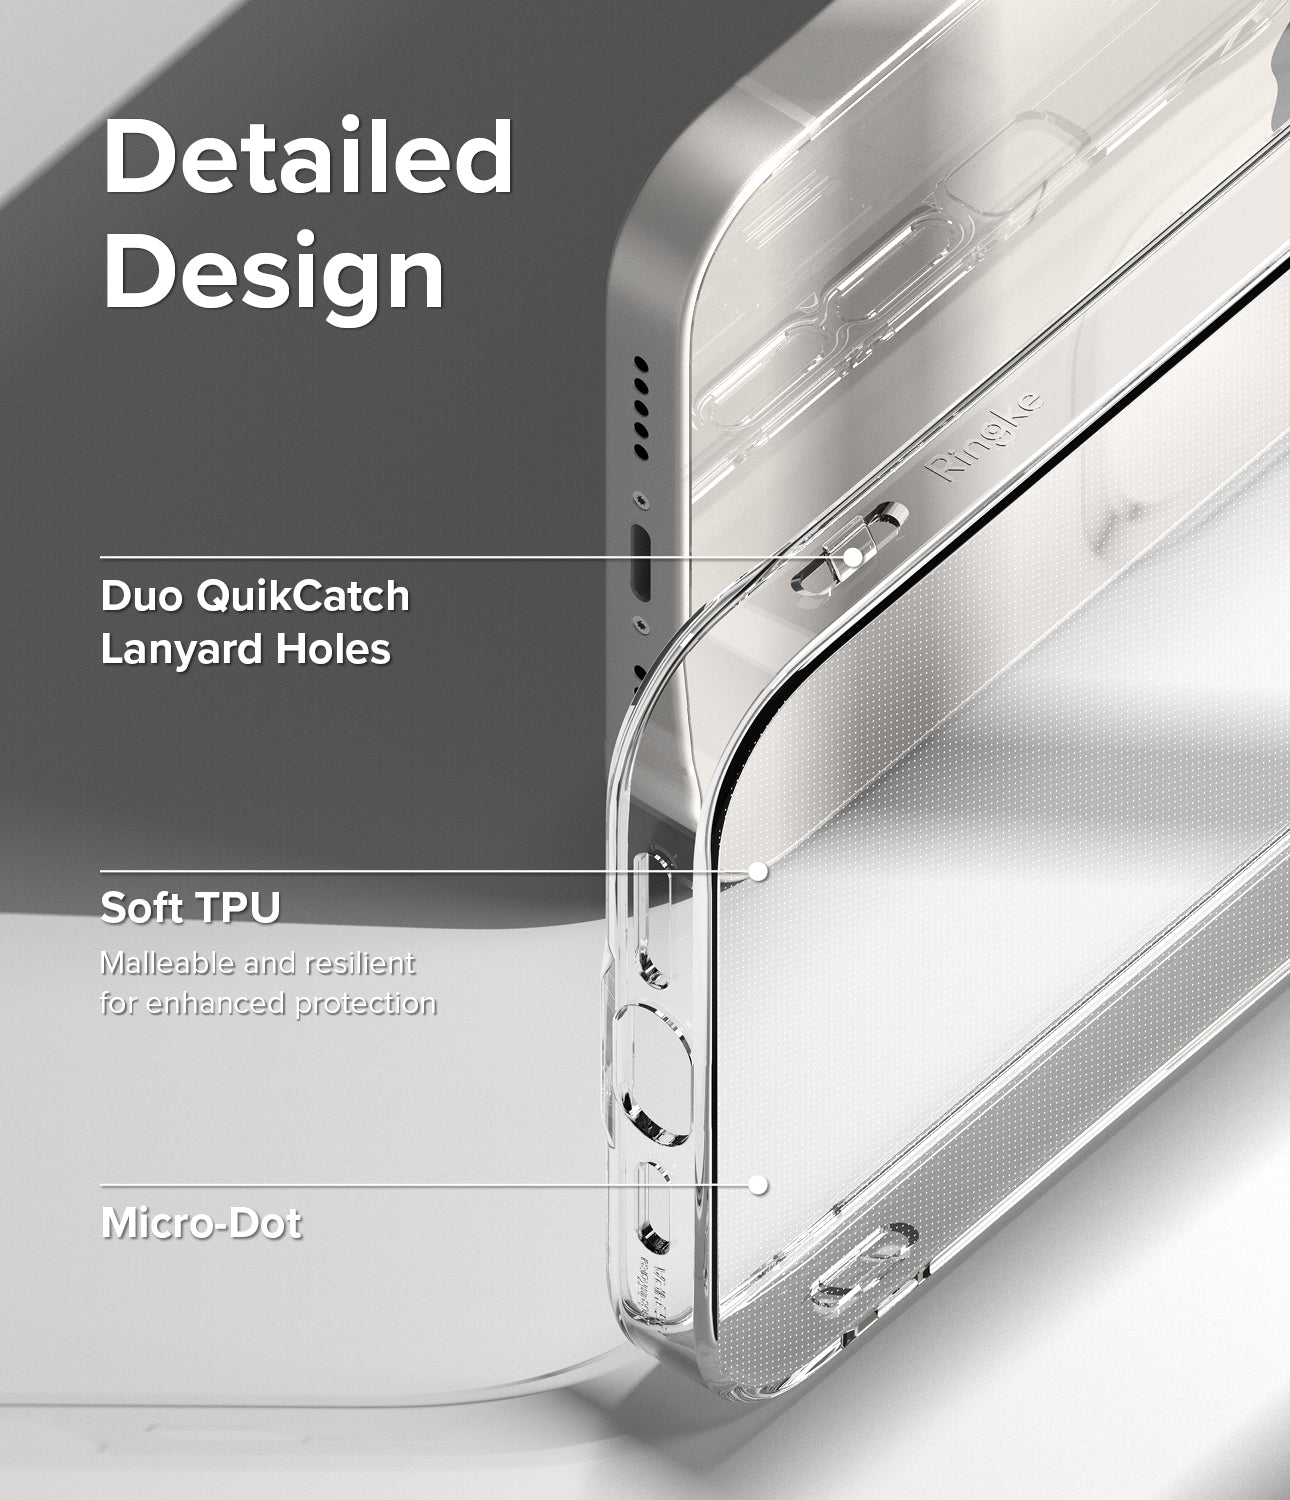 iPhone 14 Case | Air - Clear - Detailed Design. Duo QuikCatch Lanyard Holes. Malleable and resilient for enhanced protection with Soft TPU. Micro-Dot